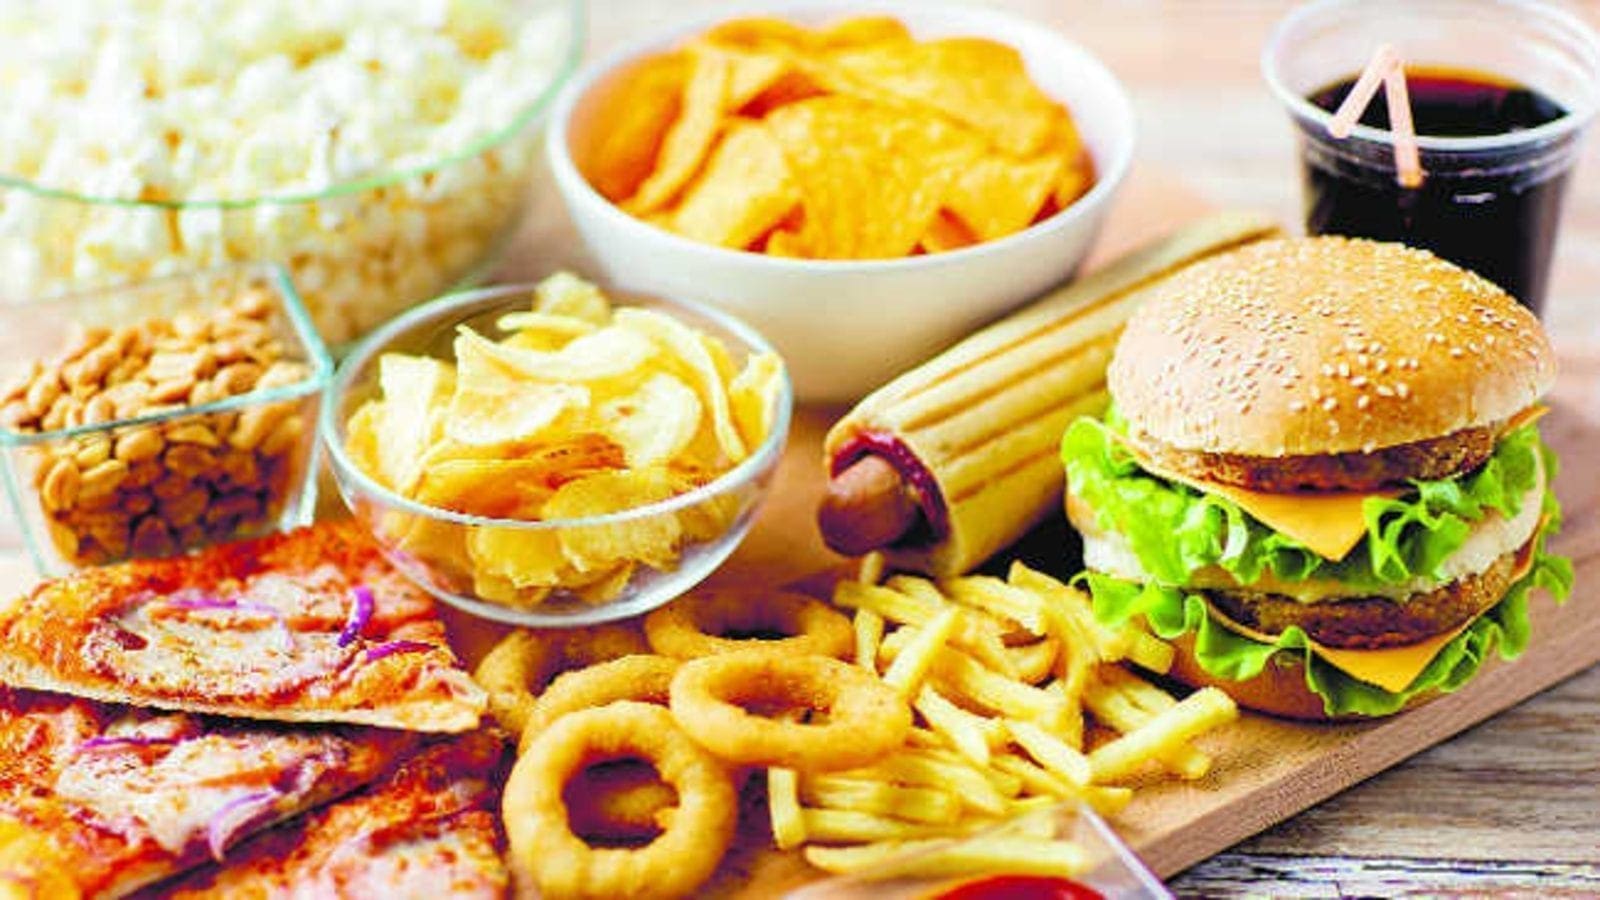 UK issues stringent regulations for junk food marketing to curb rise of unhealthy eating habits